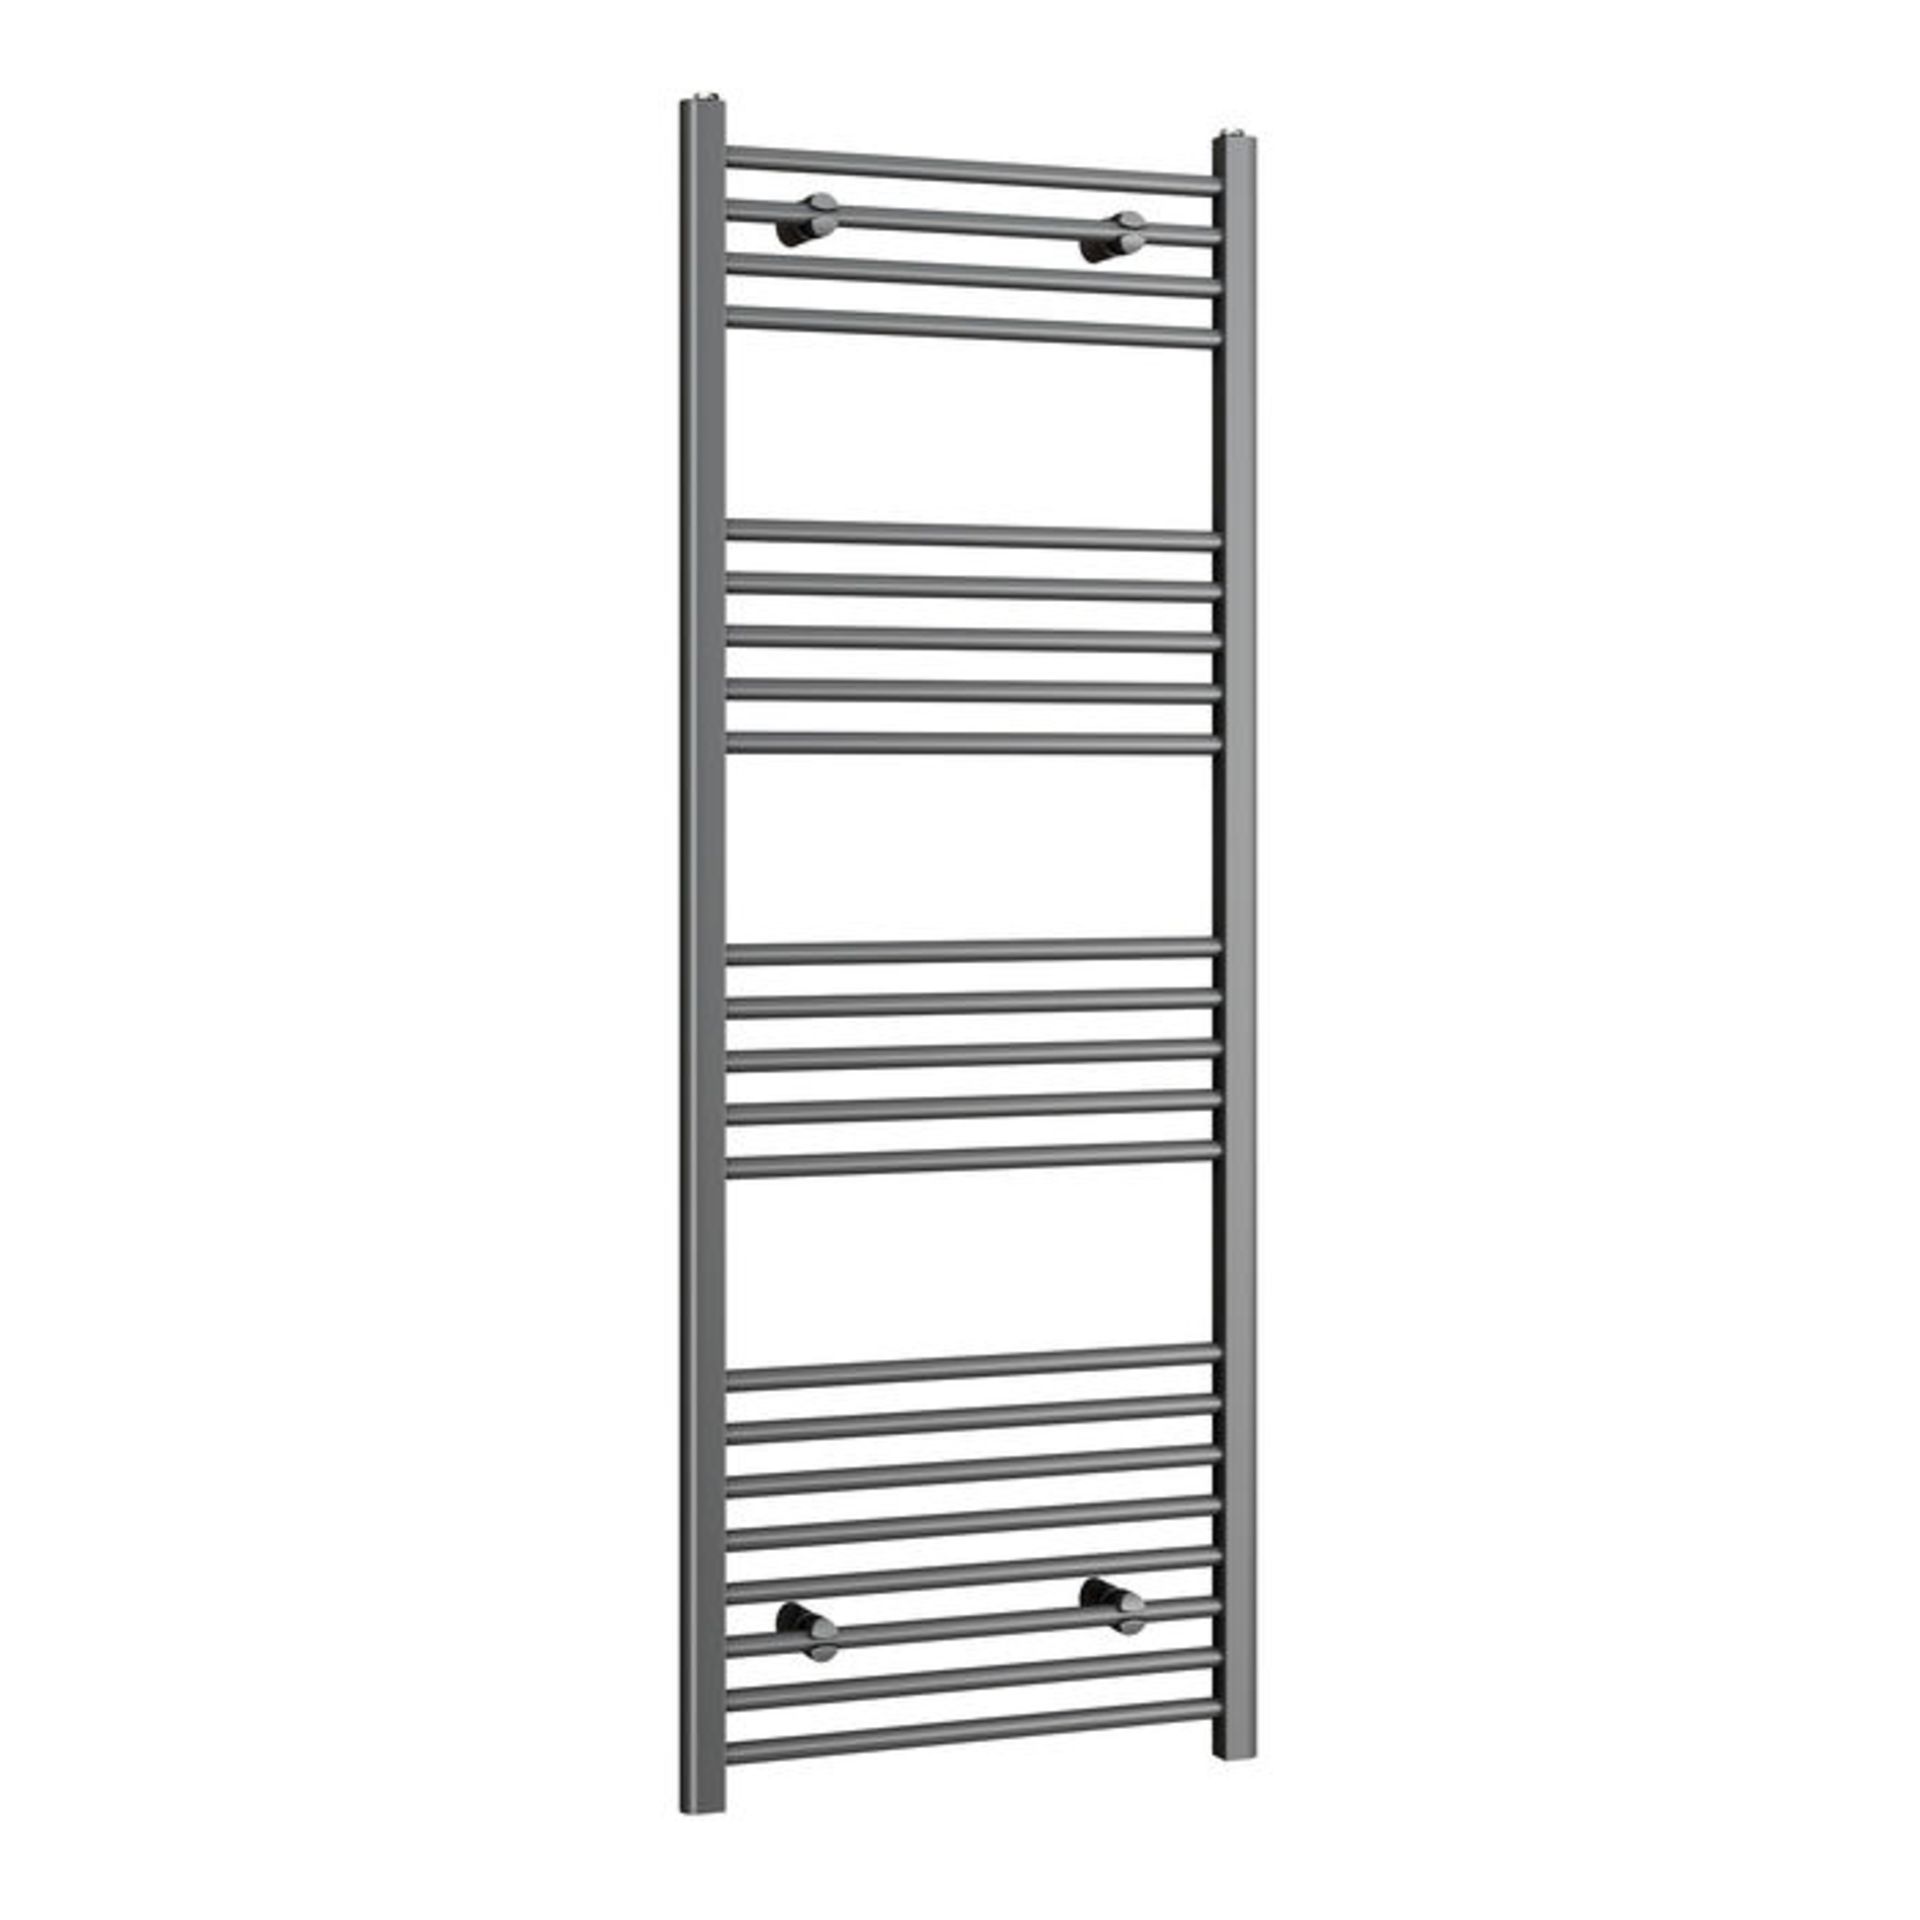 (PT12) 1600x600mm - 20mm Tubes - Anthracite Heated Straight Rail Ladder Towel Radiator. Corrosion - Image 2 of 2